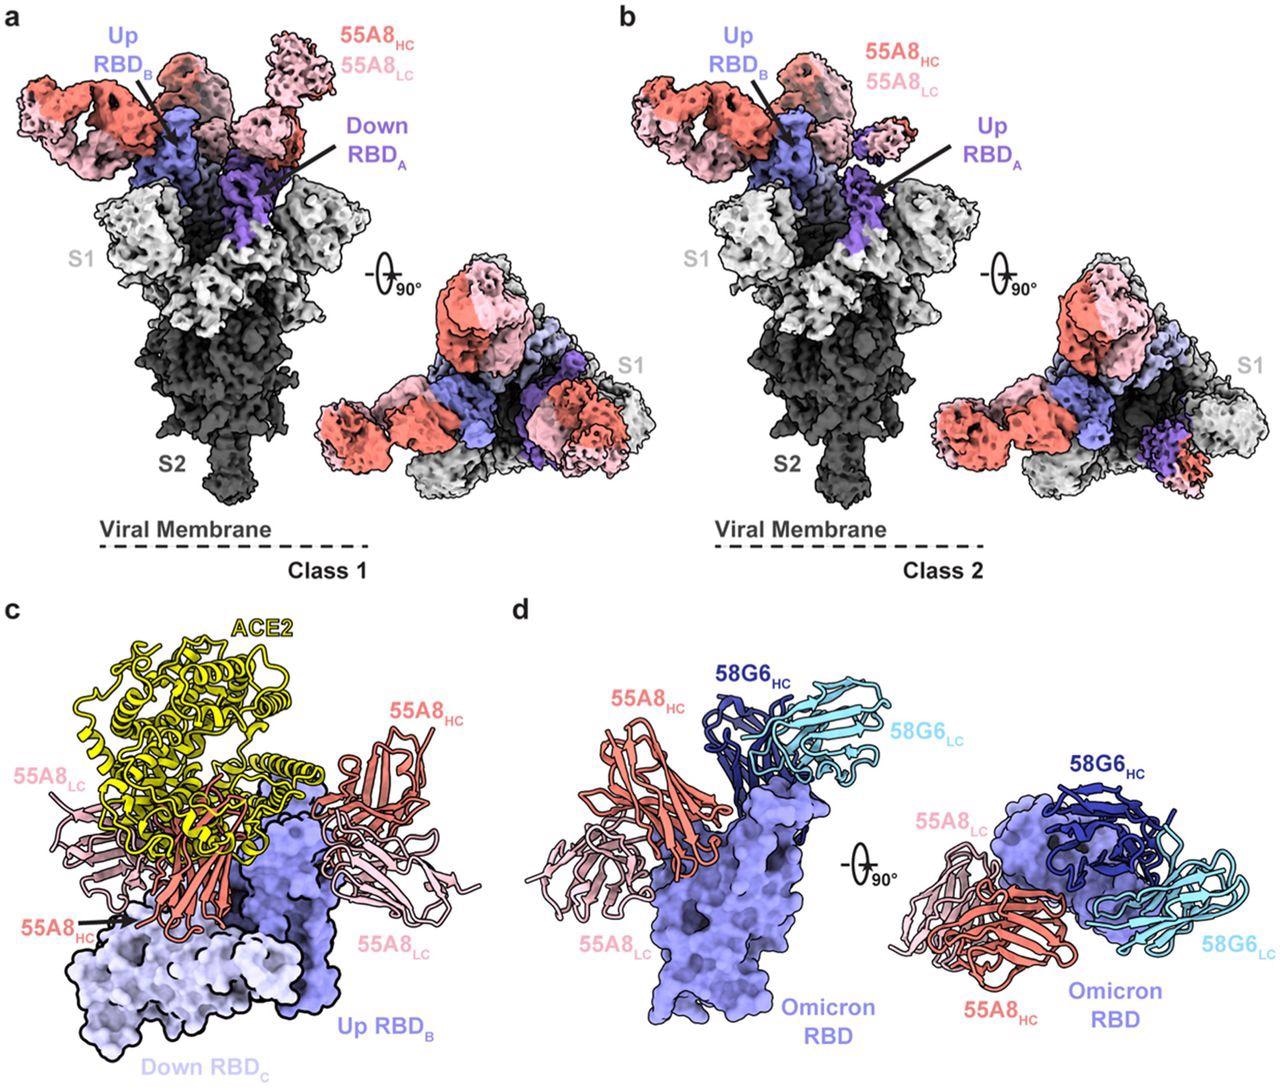 Cryo-EM structures of 55A8 binding to the SARS-CoV-2 Omicron S protein. a-b The cryo-EM densities of the 55A8 Fab-Omicron S complex we e observed in two classes (a, Class I, 3.4 Å, 3 Fabs bound with Omicron S in the “2-up/1-down” conformation; b, Class II, 3.4 Å, 3 Fabs bound with Omicron S in the “1-up/2-down” conformation). c Superposition of the locally refined Omicron RBD-ACE2 (PDB ID: 7WSA) model together with the locally refined Omicron RBD-55A8 Fab model. d Locally refined model of the 55A8 Fab and 58G6 Fab on the same up Omicron RBD. HC, heavy chain; LC, light chain.